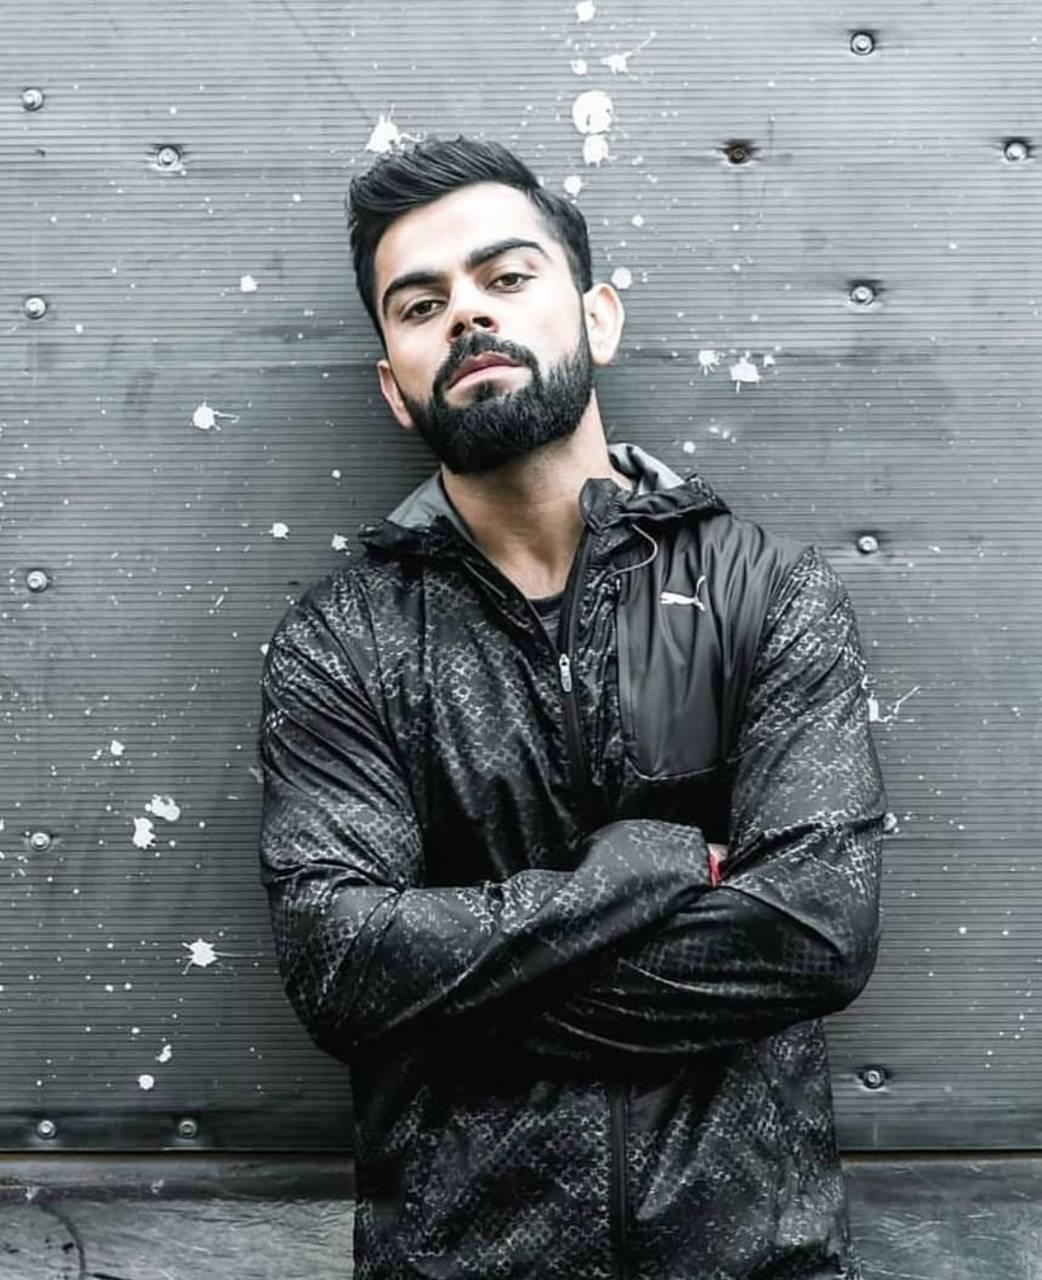 Virat Kohli Photos & HD Wallpapers for Free Download: Happy Birthday Kohli  Greetings, HD Images in RCB and Indian Cricket Team Jersey and Positive  Messages to Share Online | 🏏 LatestLY